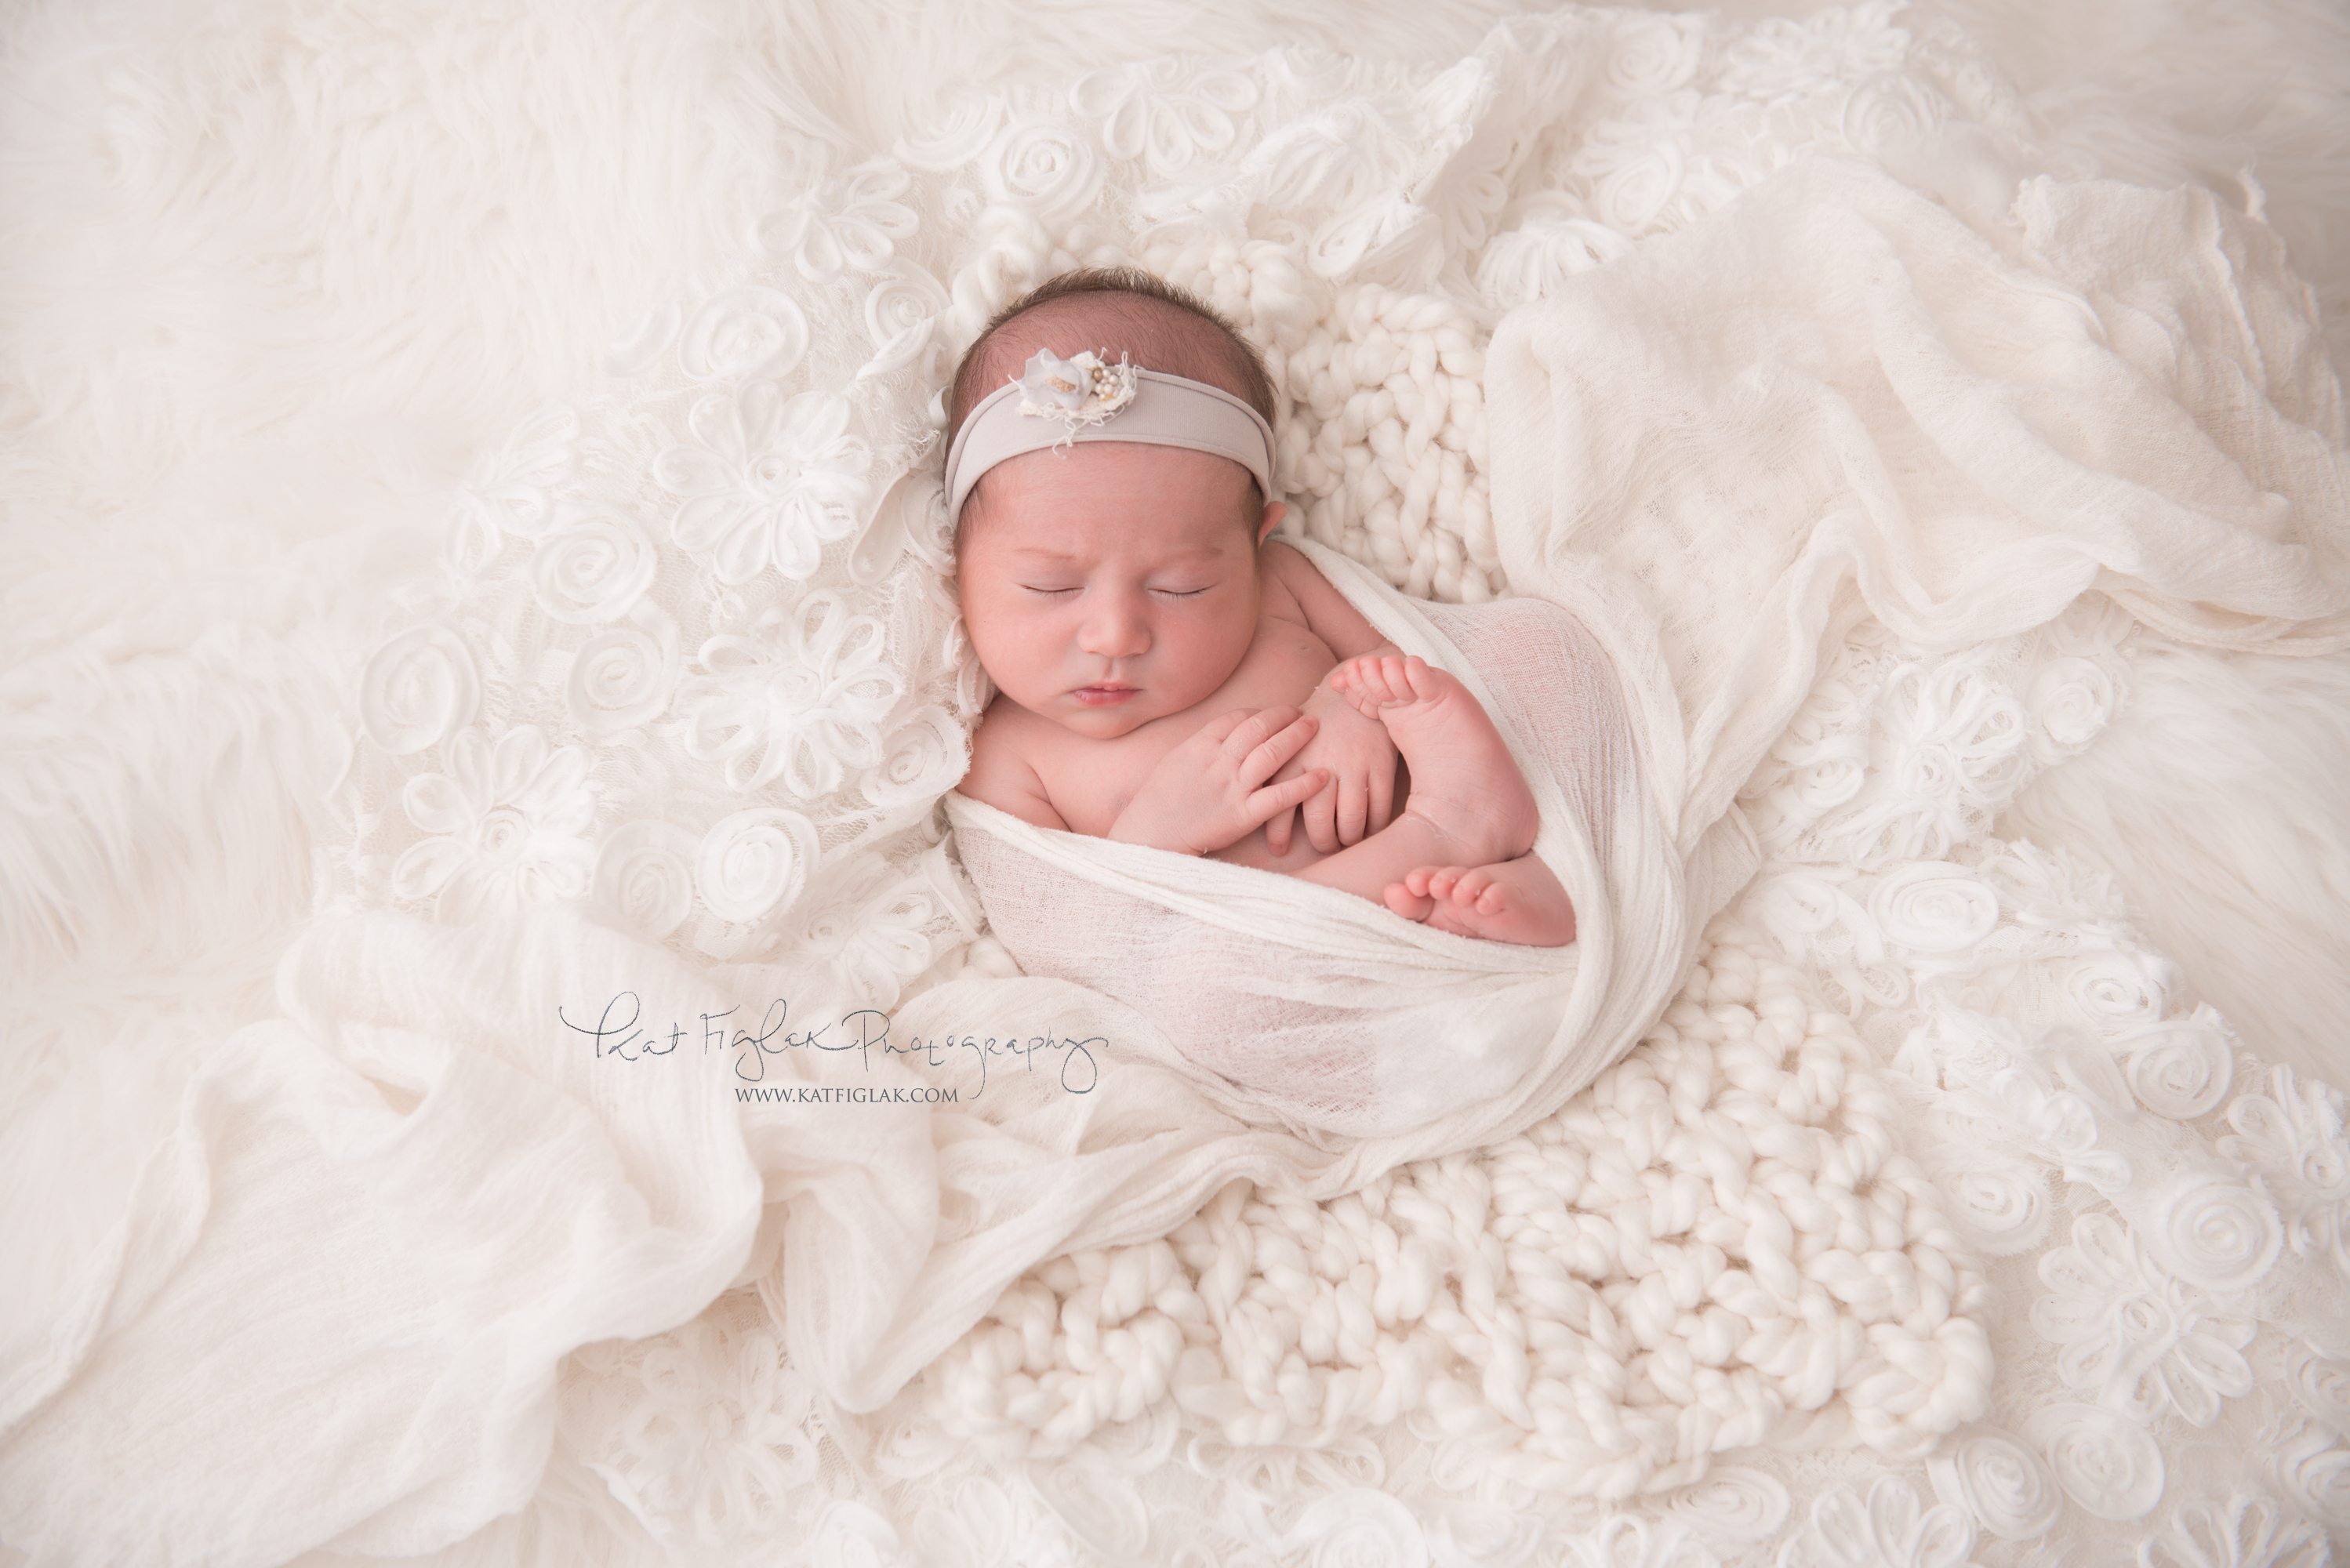 Newborn baby girl on white rug and knits sleeping with floral tieback headband